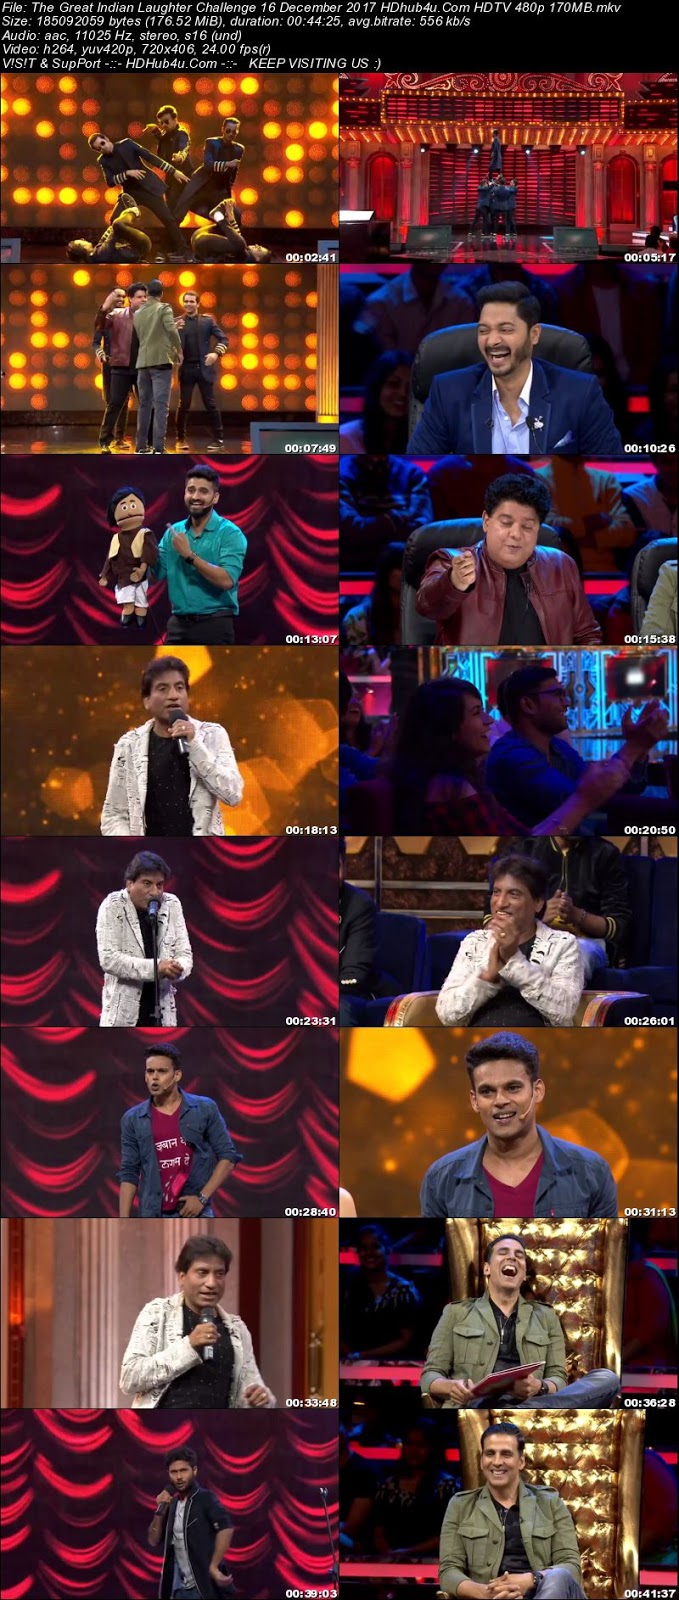 The Great Indian Laughter Challenge 16th December 480p HDTV 170MB Download